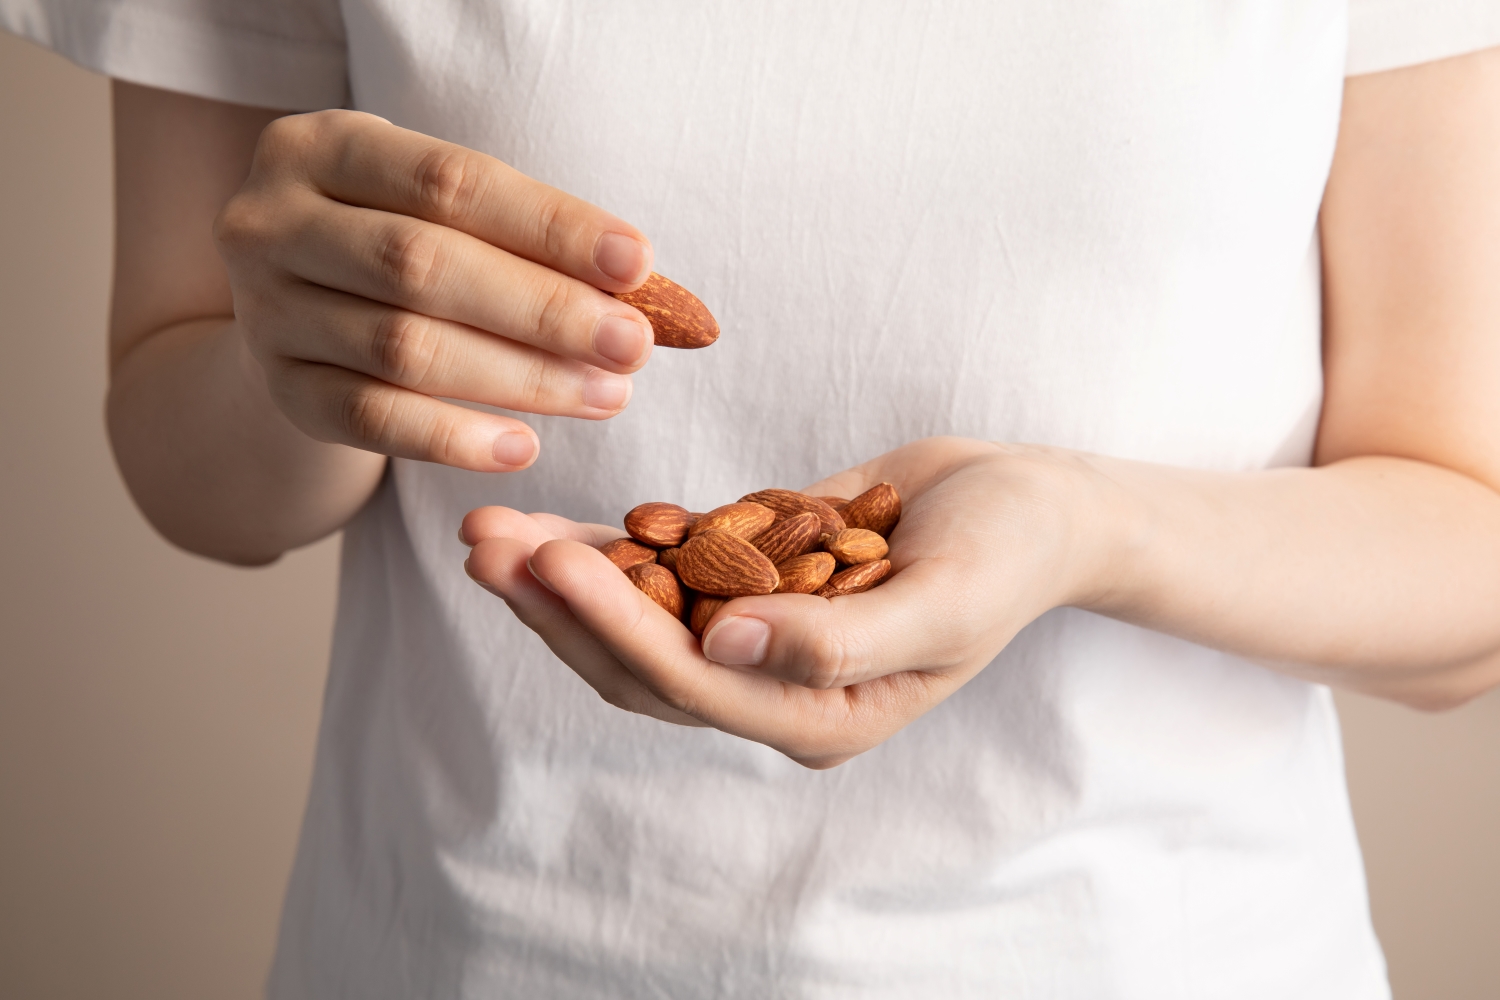 holding almonds with hands